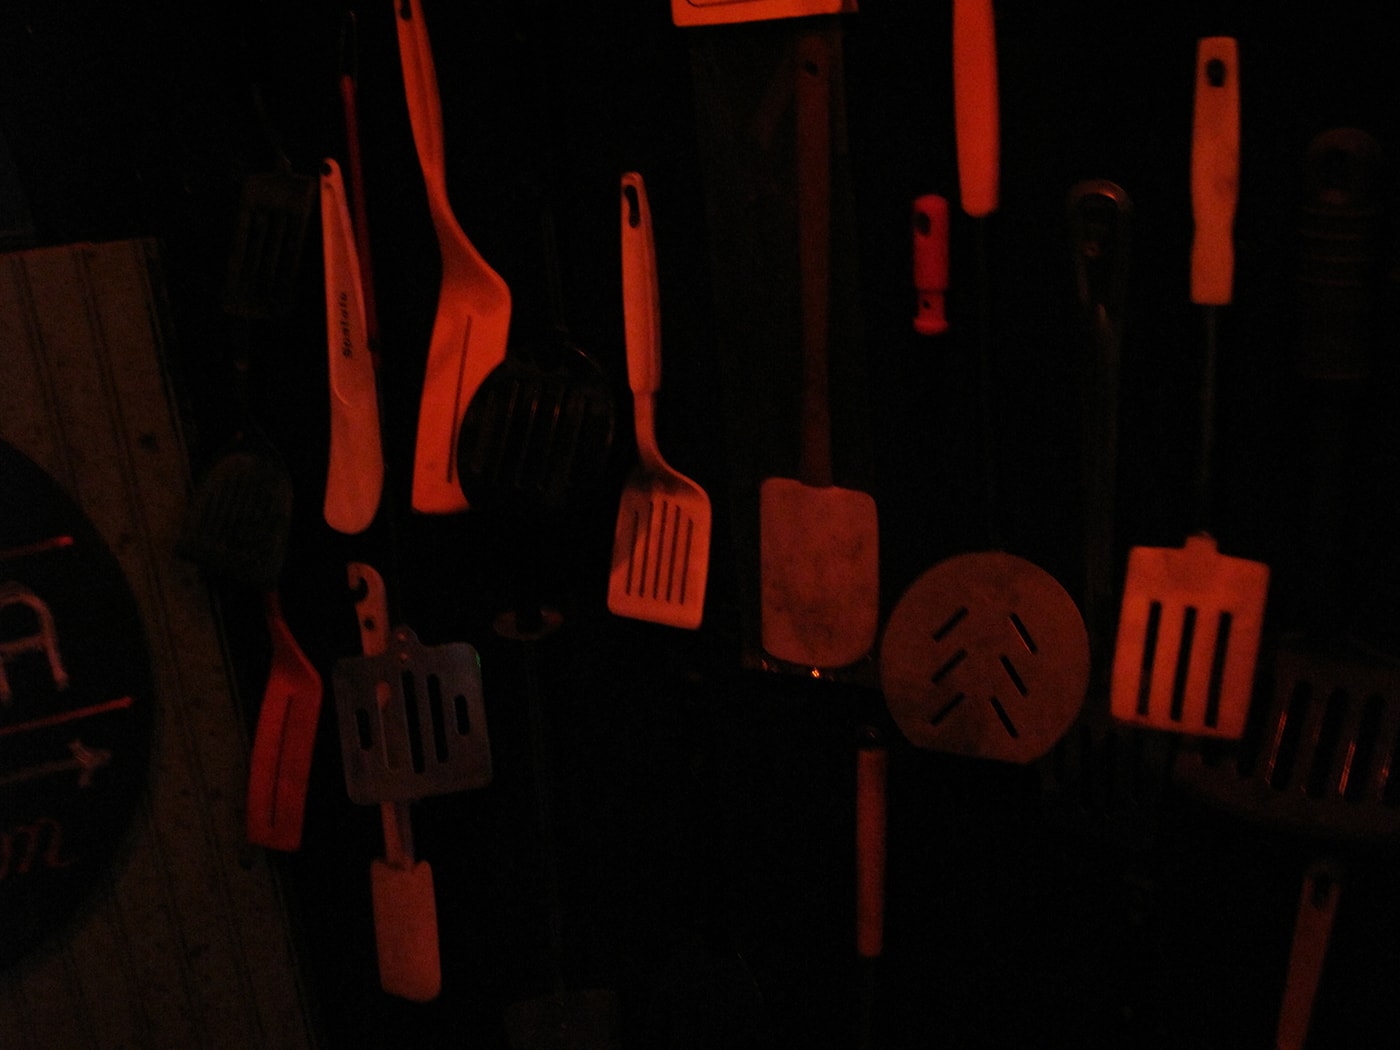 Midwest Spatula Museum in the City Museum's Museum of Mirth, Mystery and Mayhem in St. Louis, Missouri.